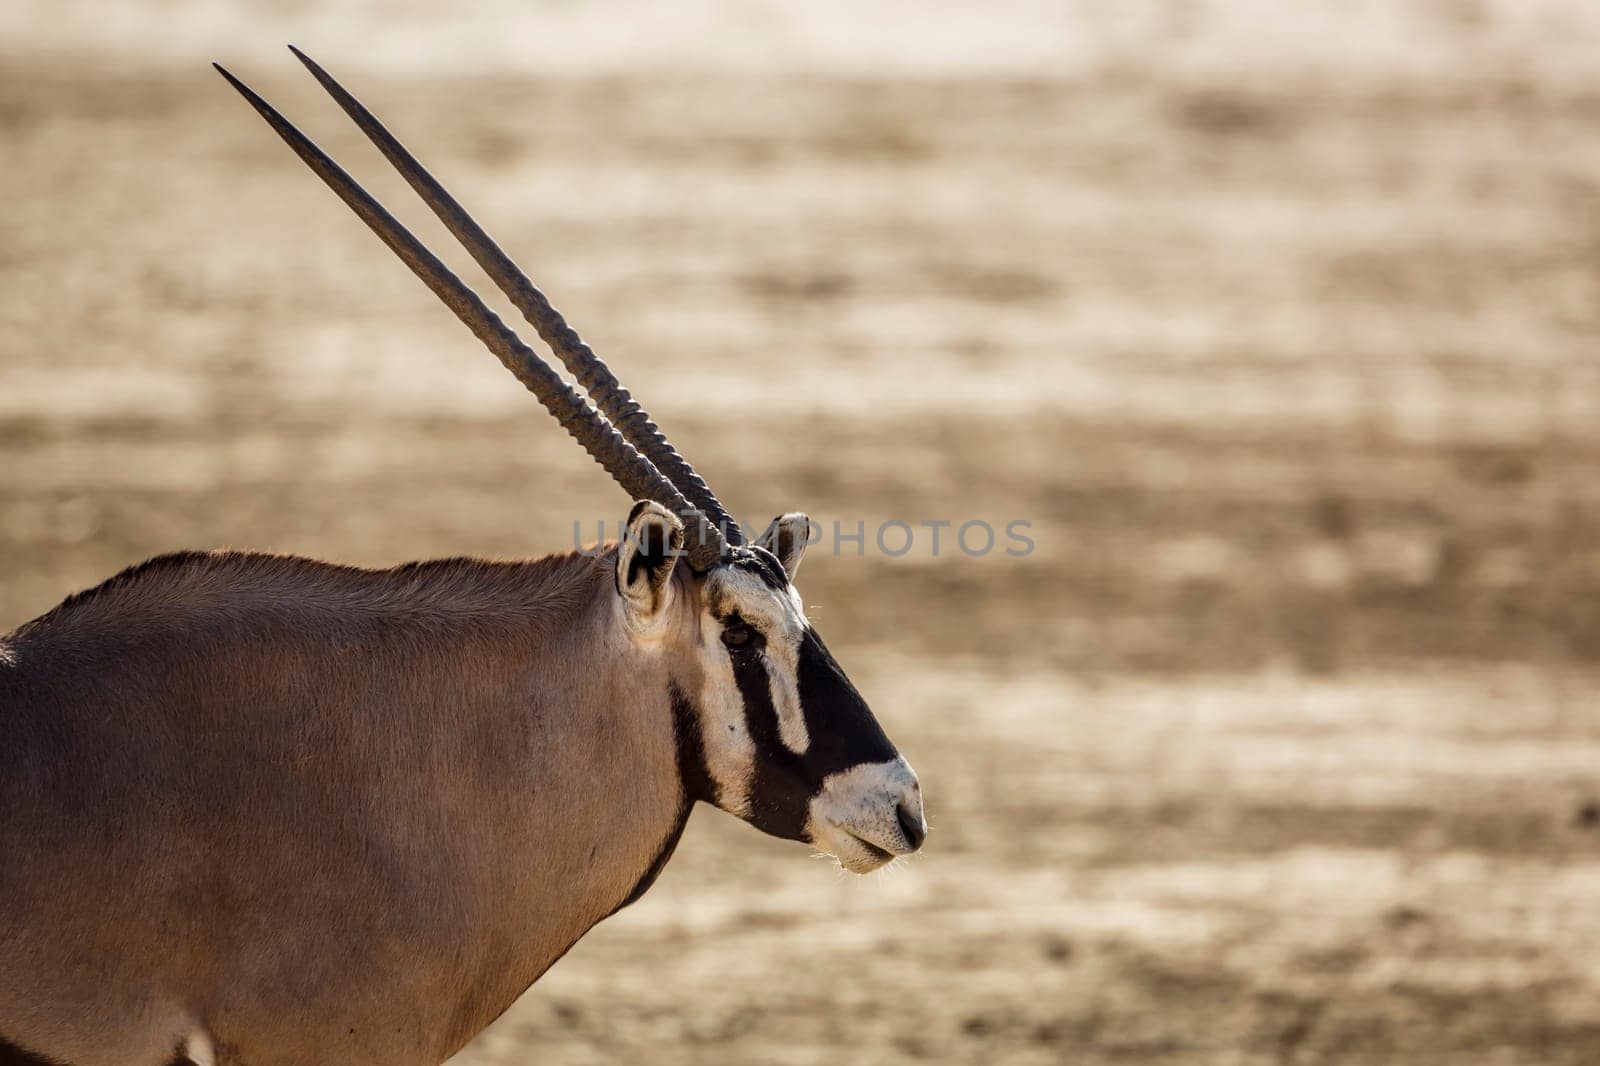 South African Oryx portrait in Kgalagadi transfrontier park, South Africa; specie Oryx gazella family of Bovidae